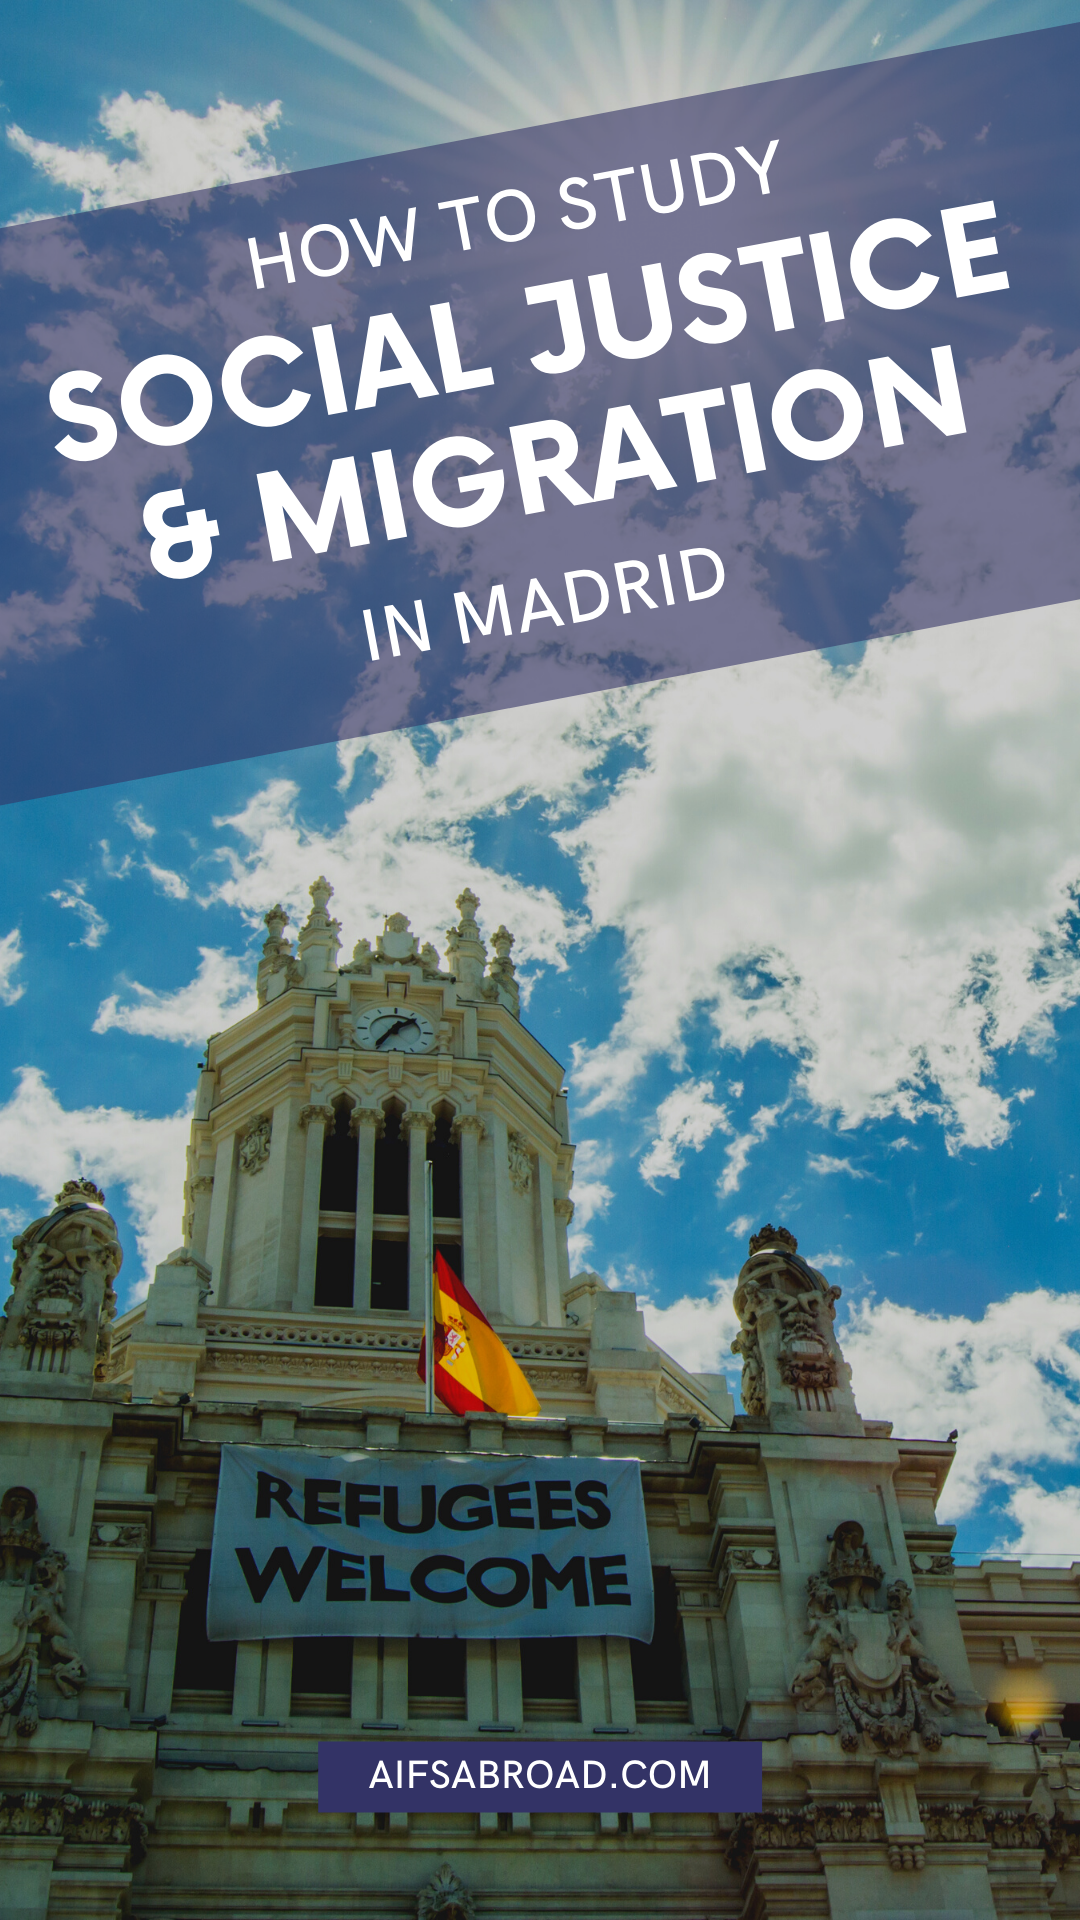 How to study social justice and migration in Madrid